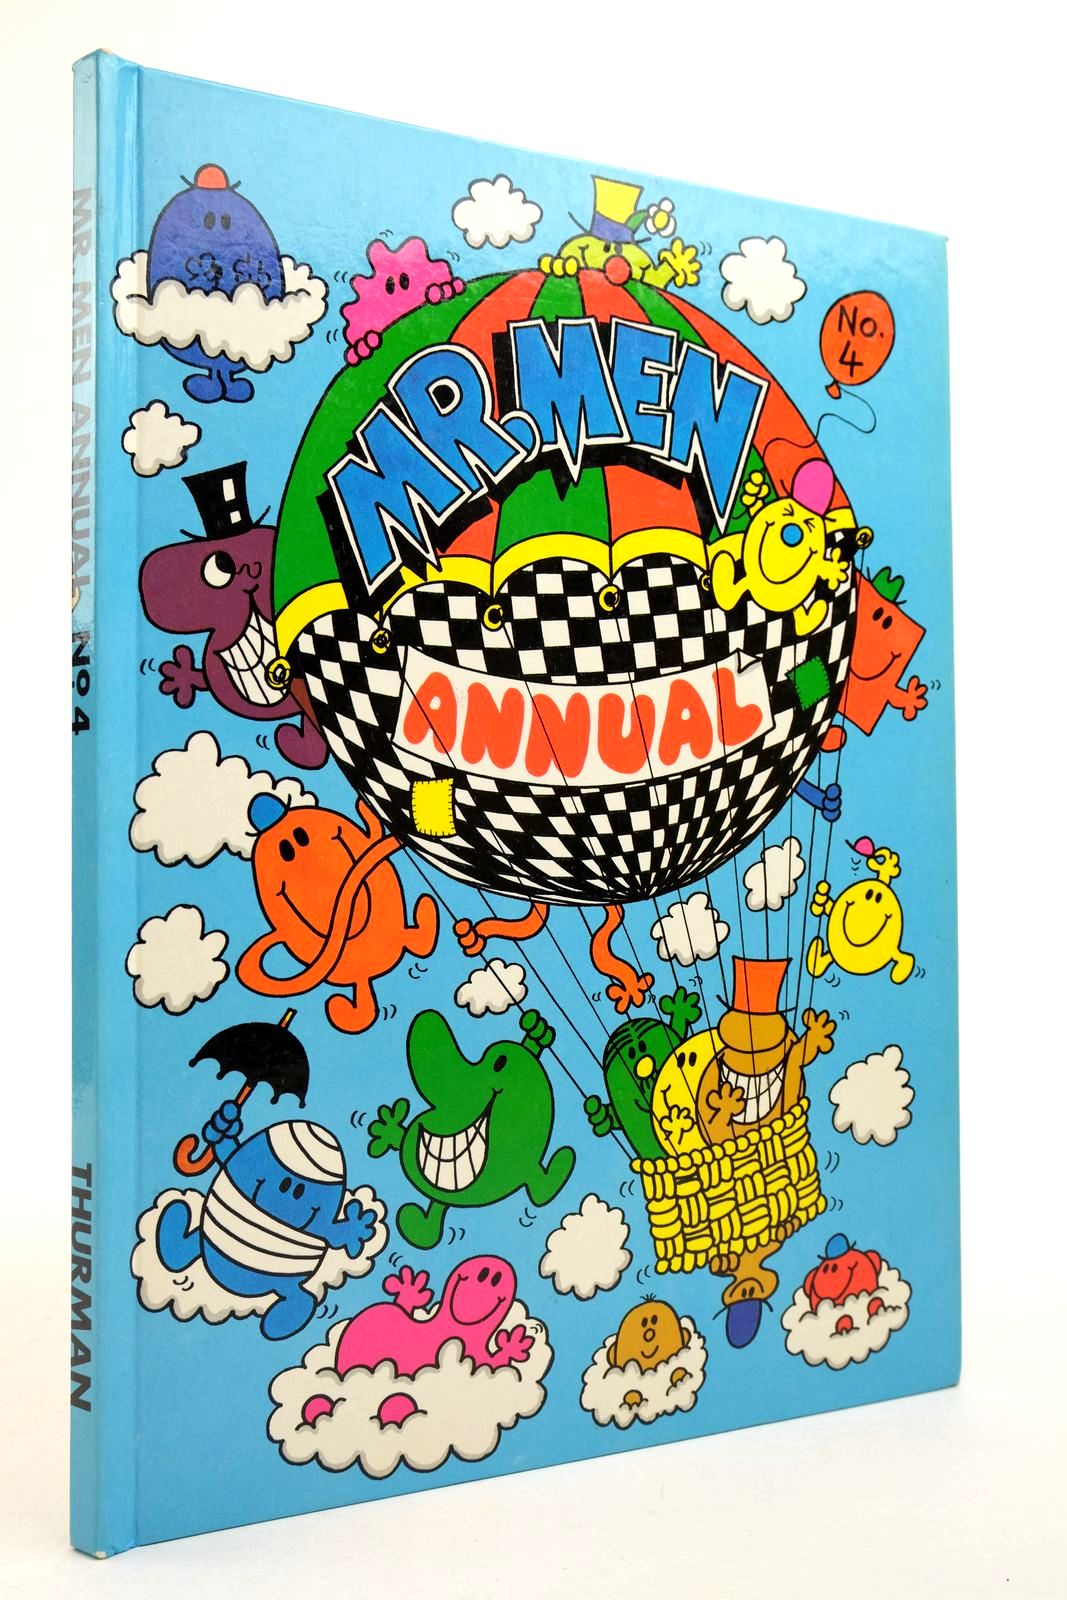 Photo of MR. MEN ANNUAL No. 4- Stock Number: 2140339